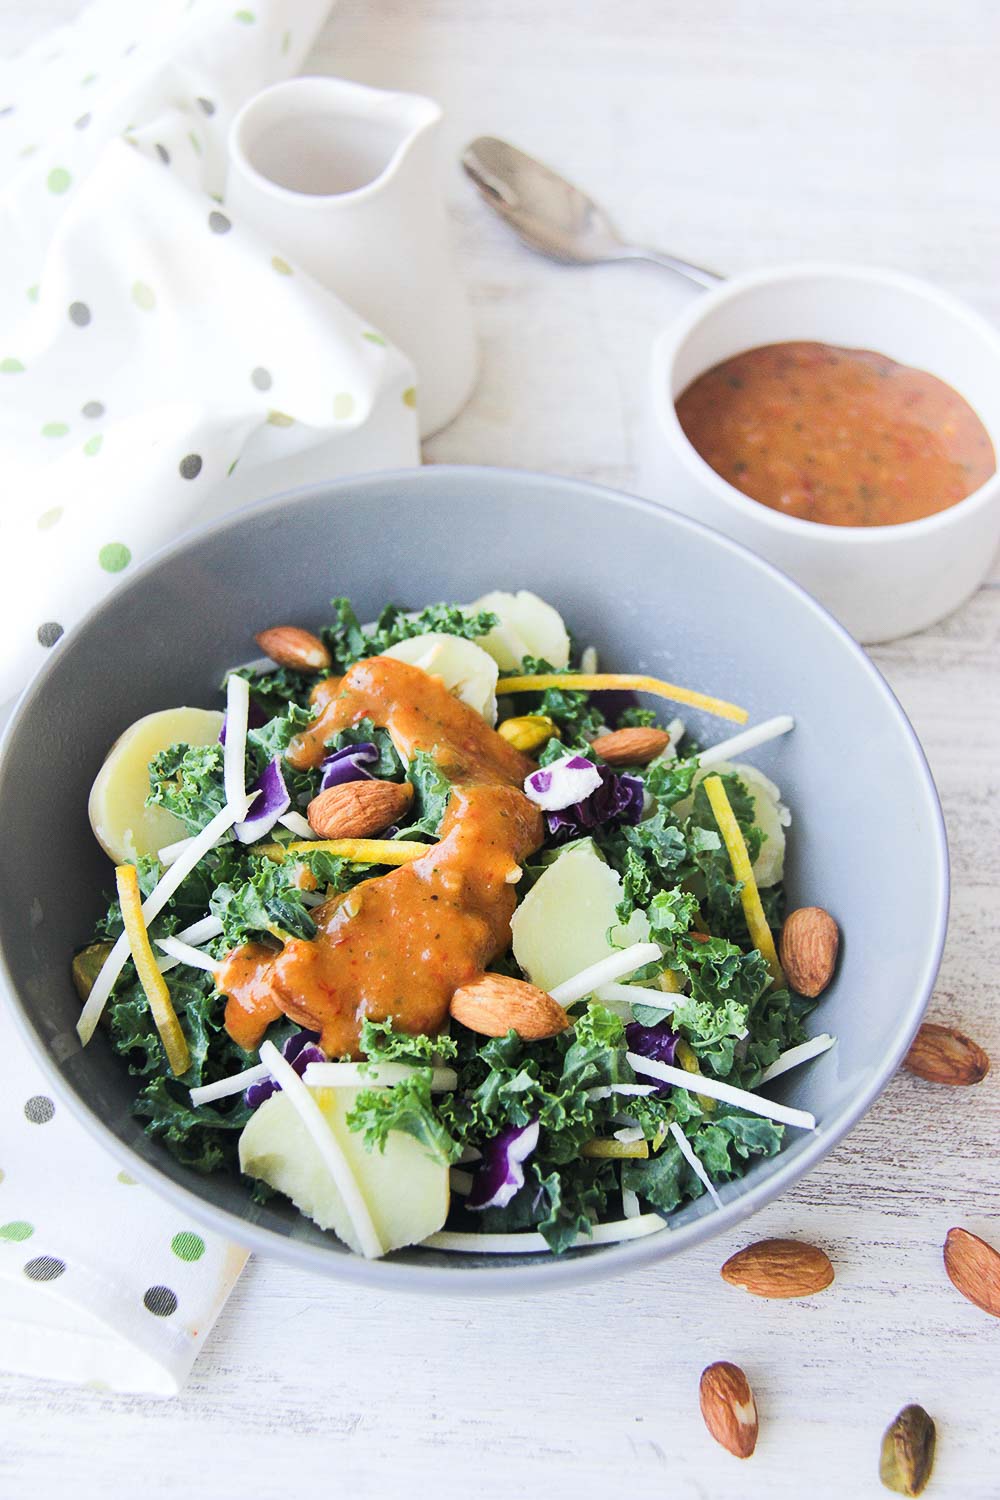 A traditional and super easy Indonesian salad with peanut satay sauce. Fabulous, delicious, and perfect for a healthy meatless Monday meal.